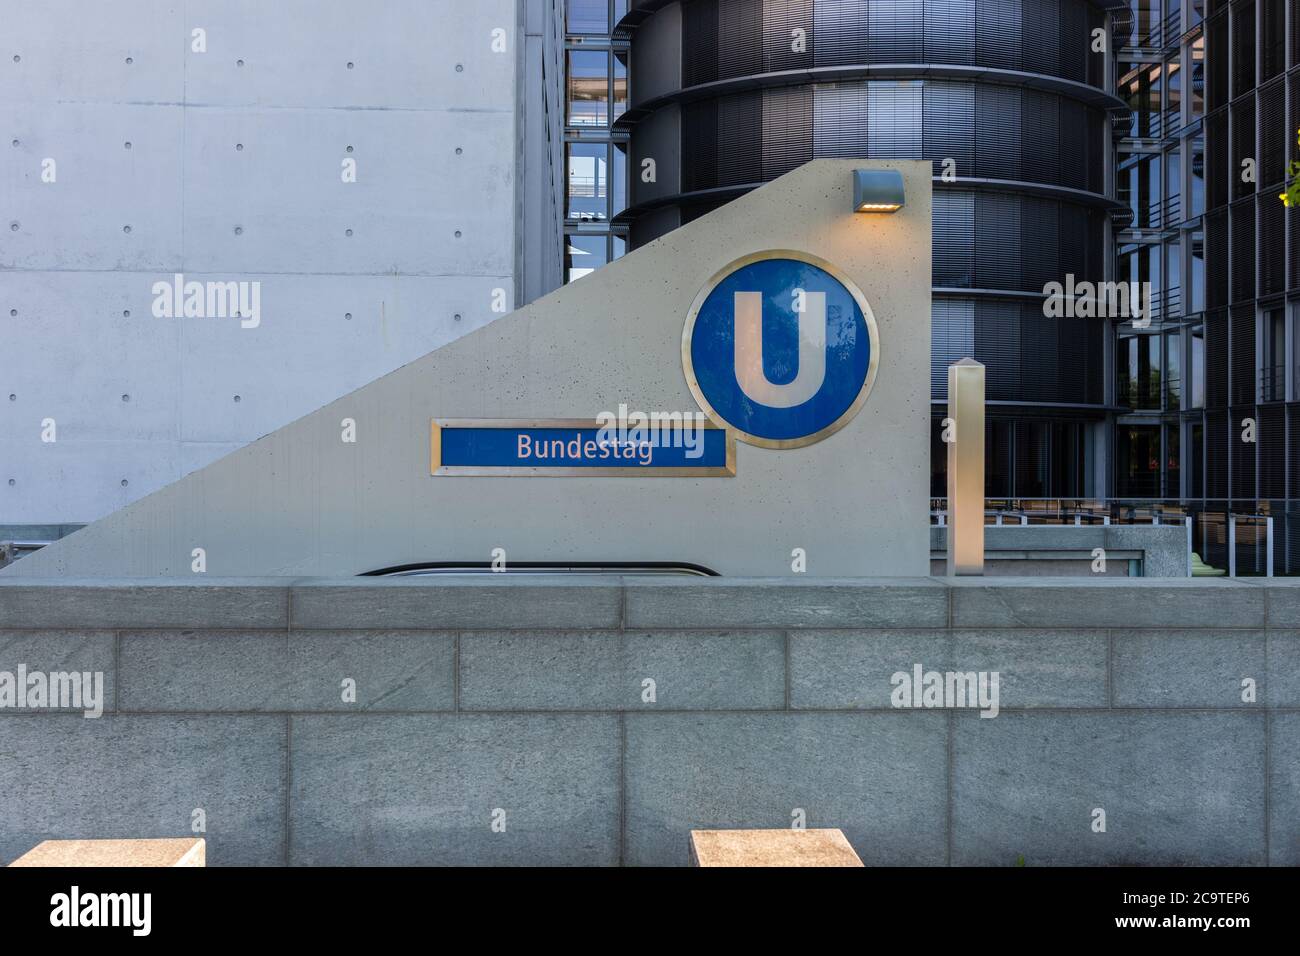 Entrance to the Bundestag underground station in Berlin Stock Photo